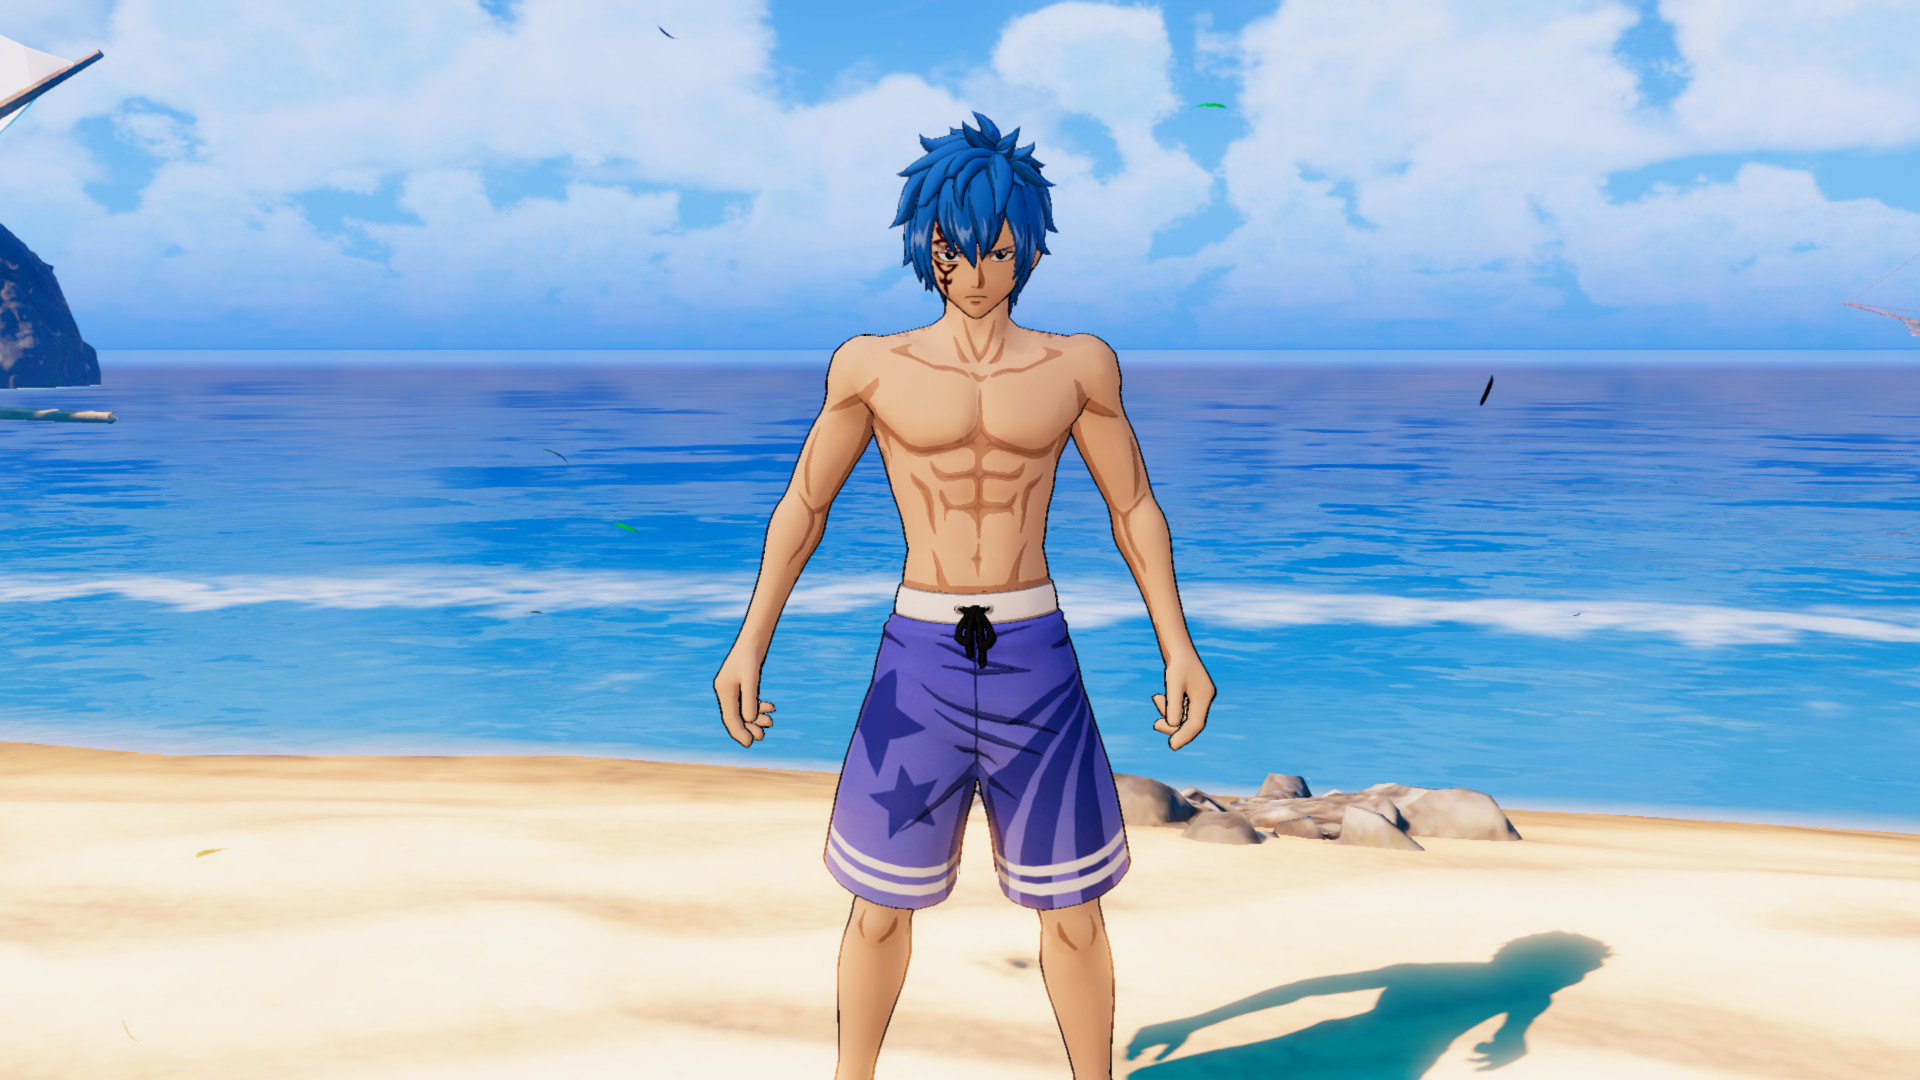 FAIRY TAIL: Jellal's Costume "Special Swimsuit" screenshot